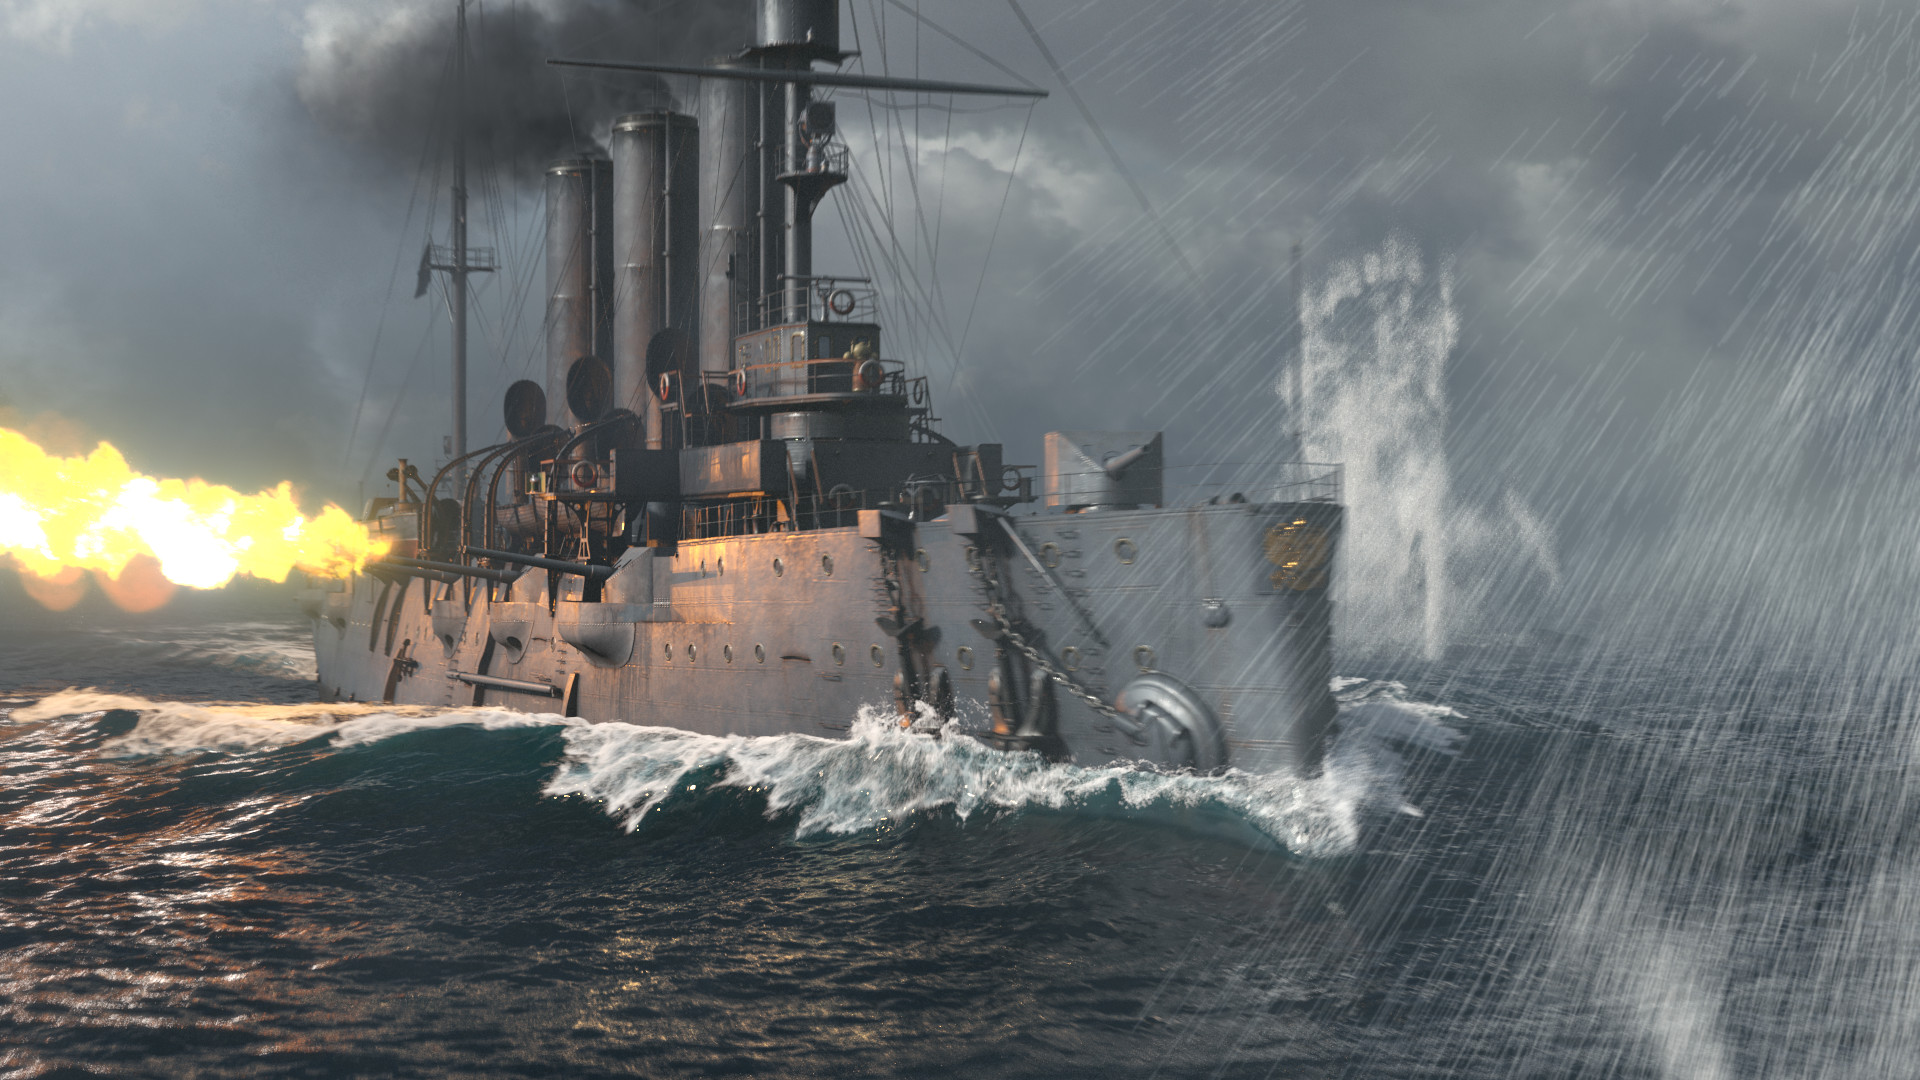 world of warships: legends pc download